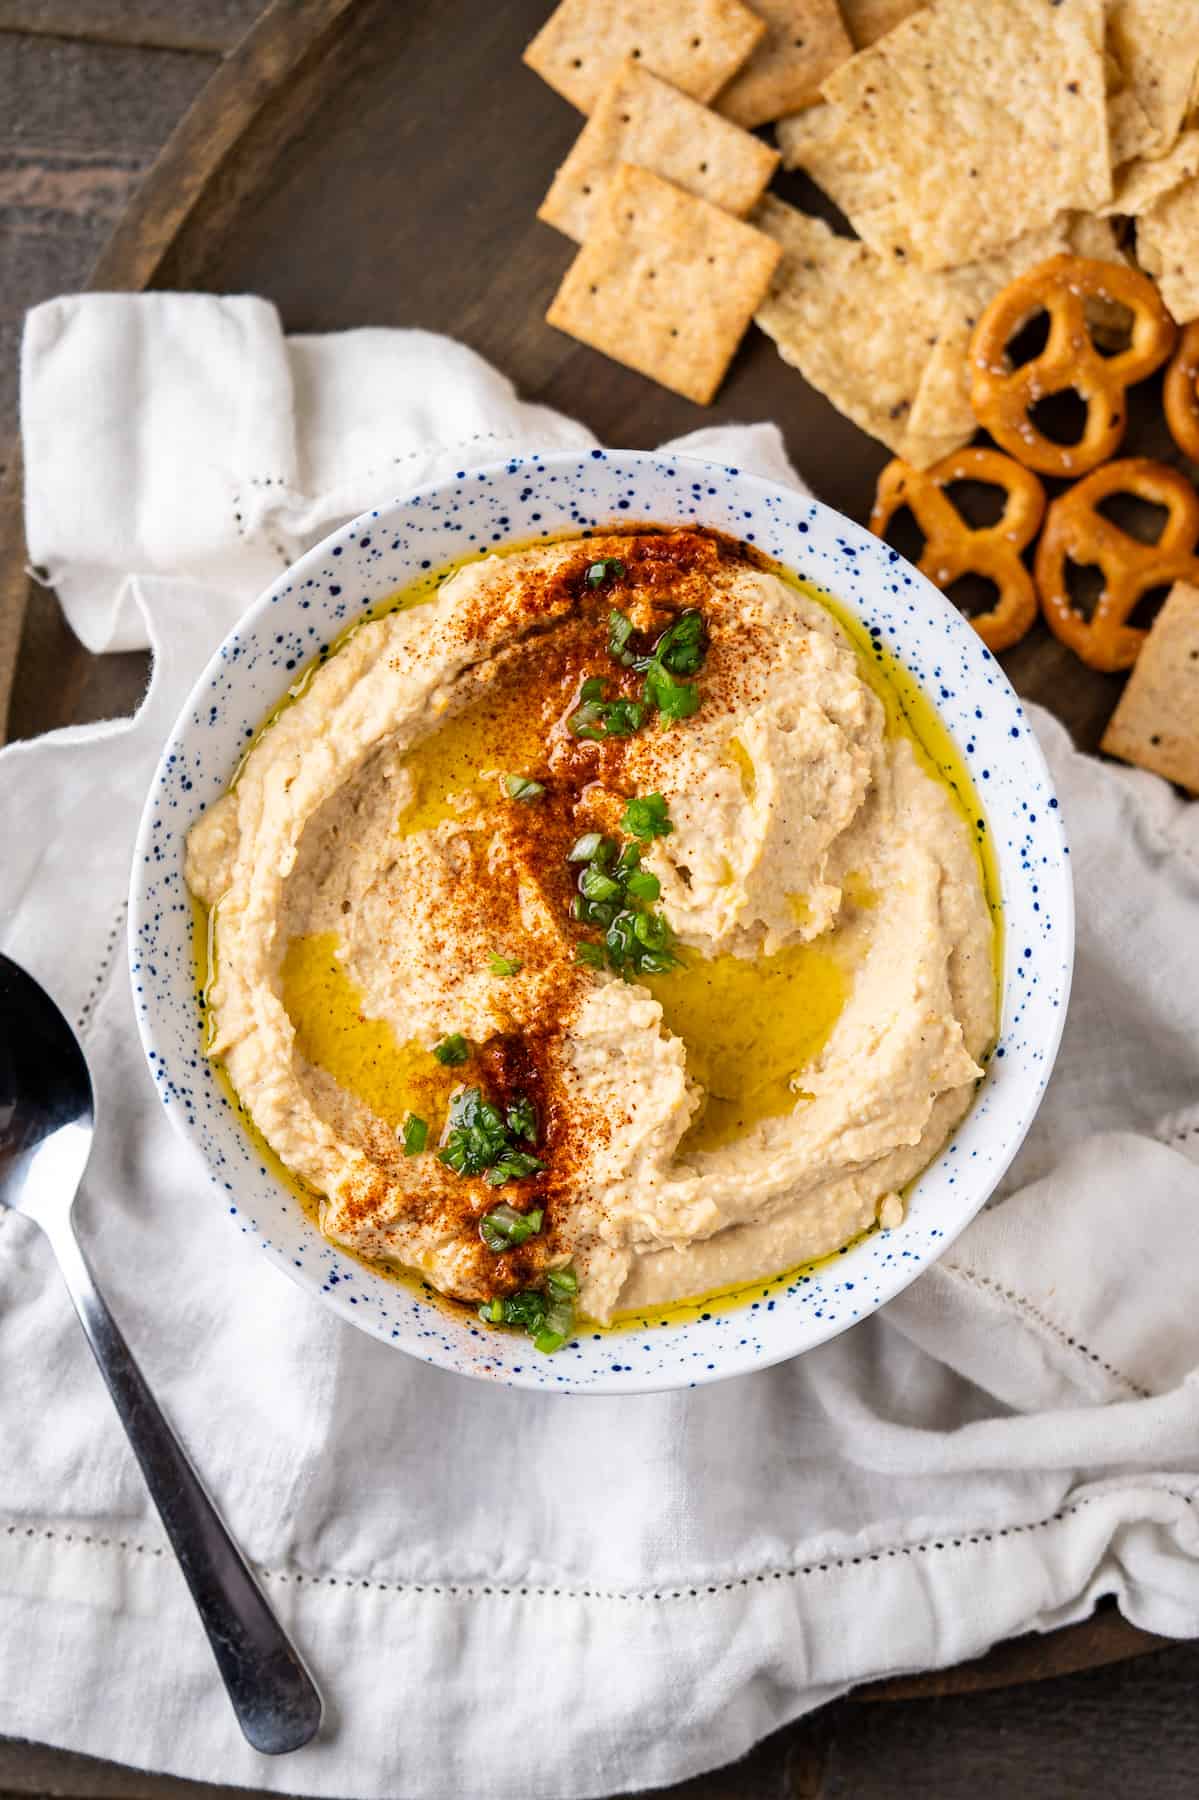 A bowl of homemade chickpea hummus with a sprinkling of paprika and chopped green onions.